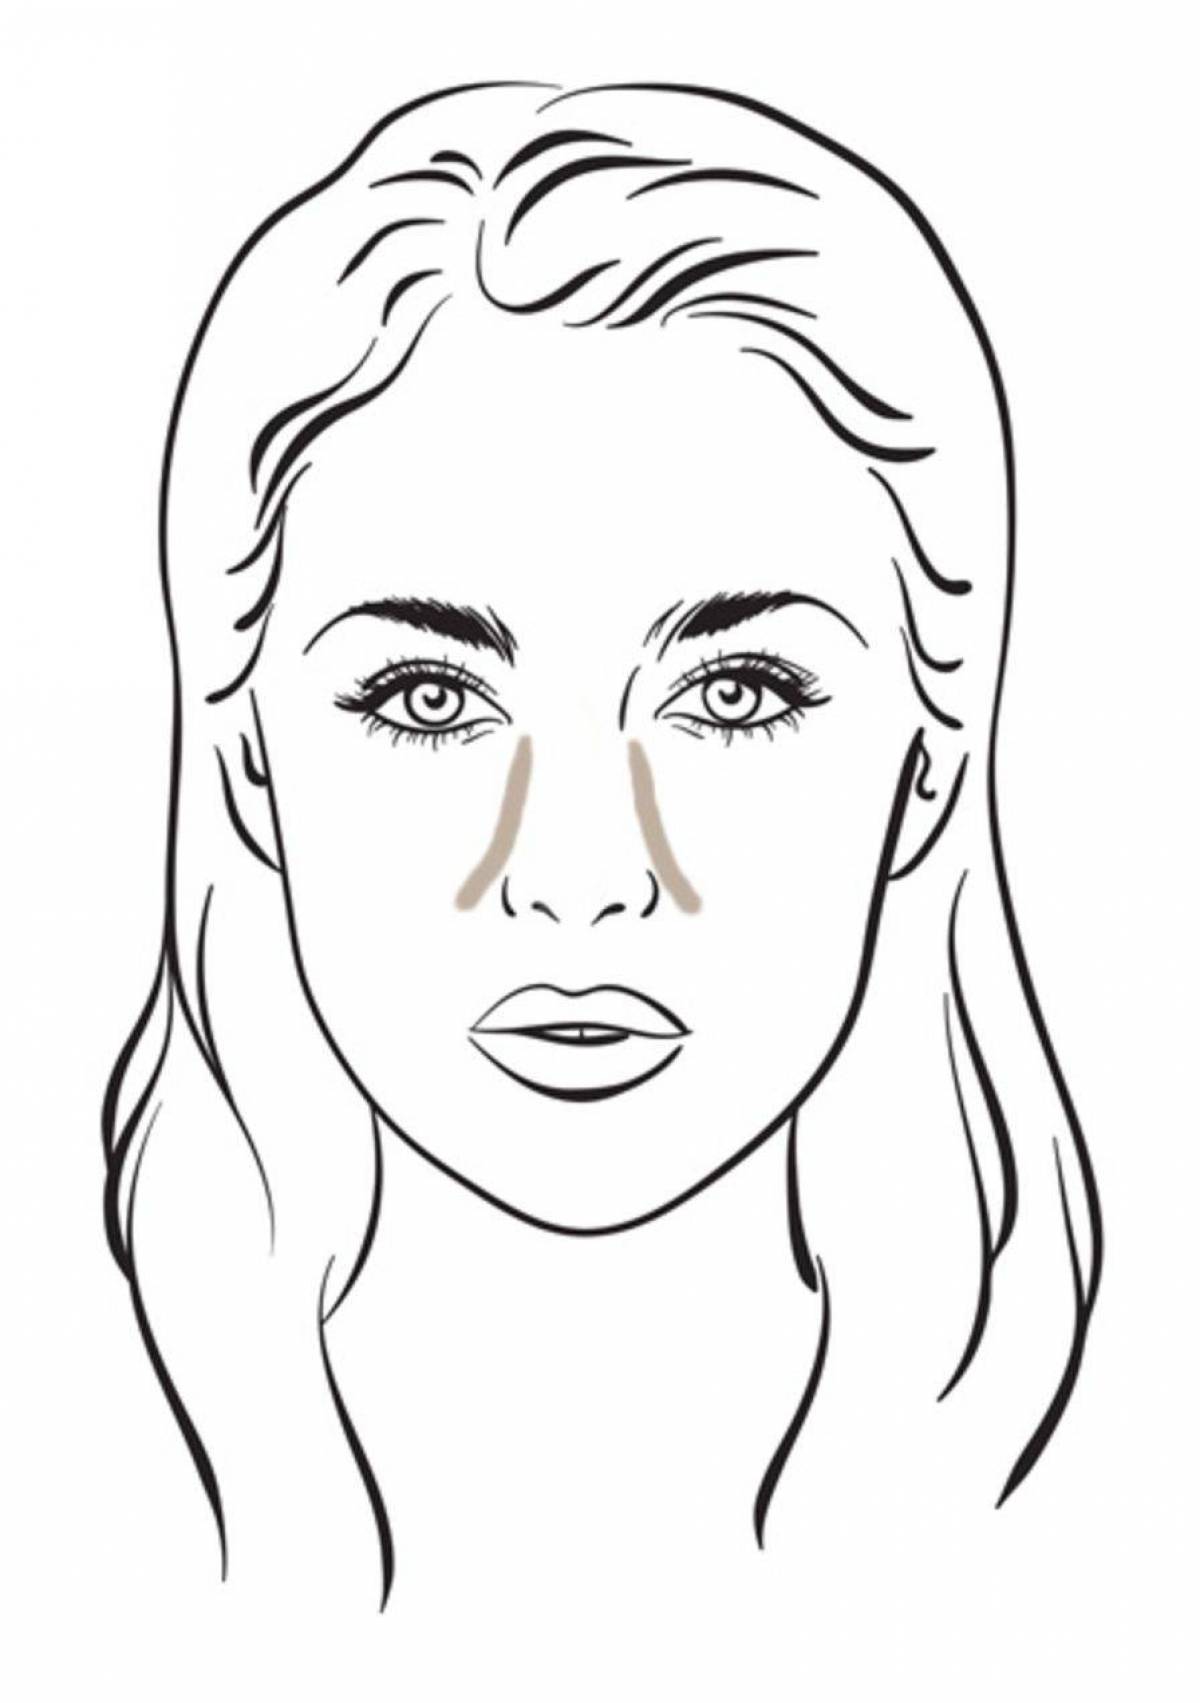 Glitter coloring book for girls with face makeup